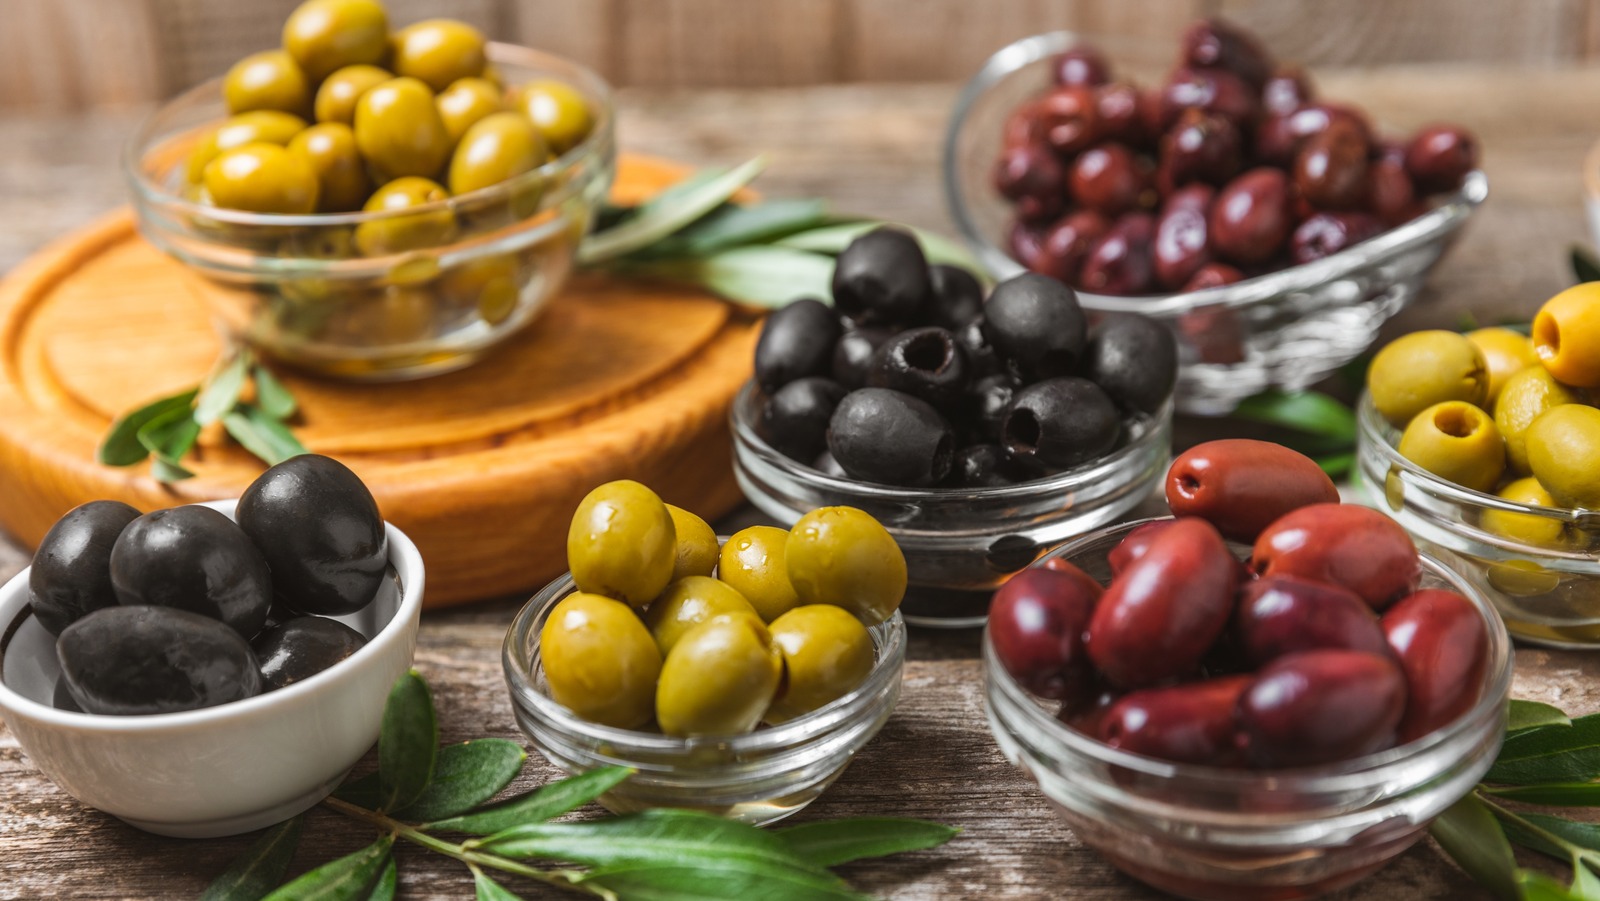 Kalamata Aren't The Only Black Olives That Deserve Your Love